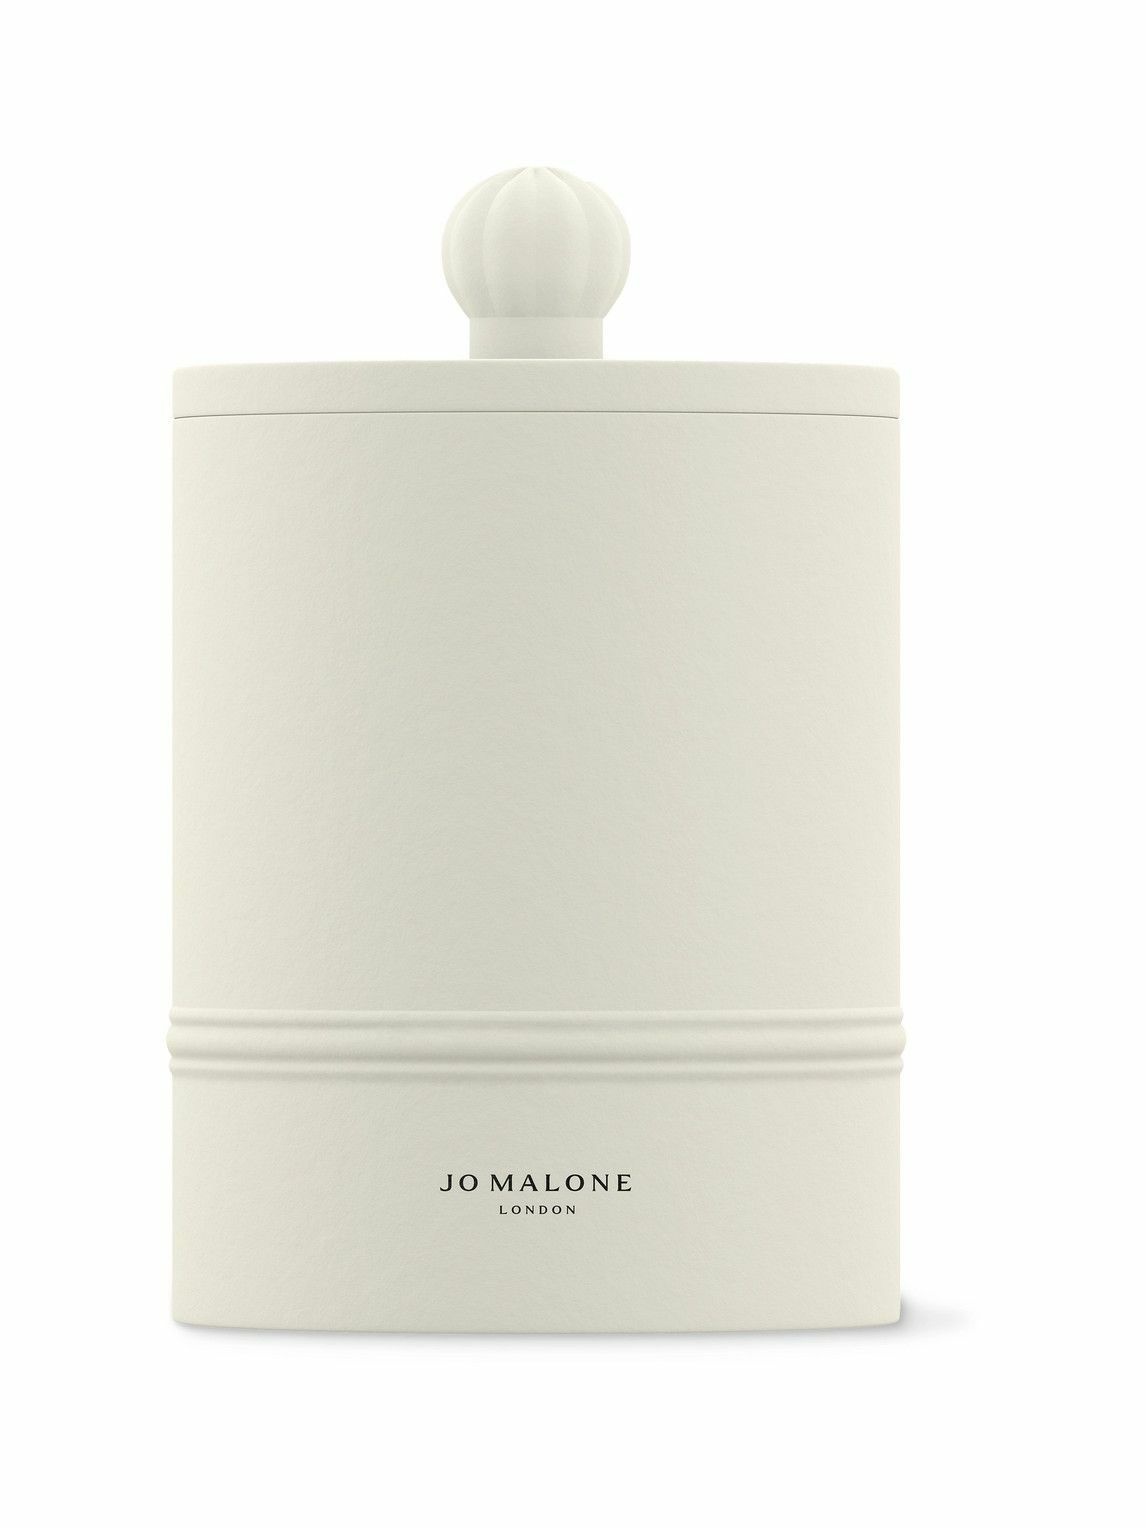 Photo: Jo Malone London - Glowing Embers Scented Candle, 300g